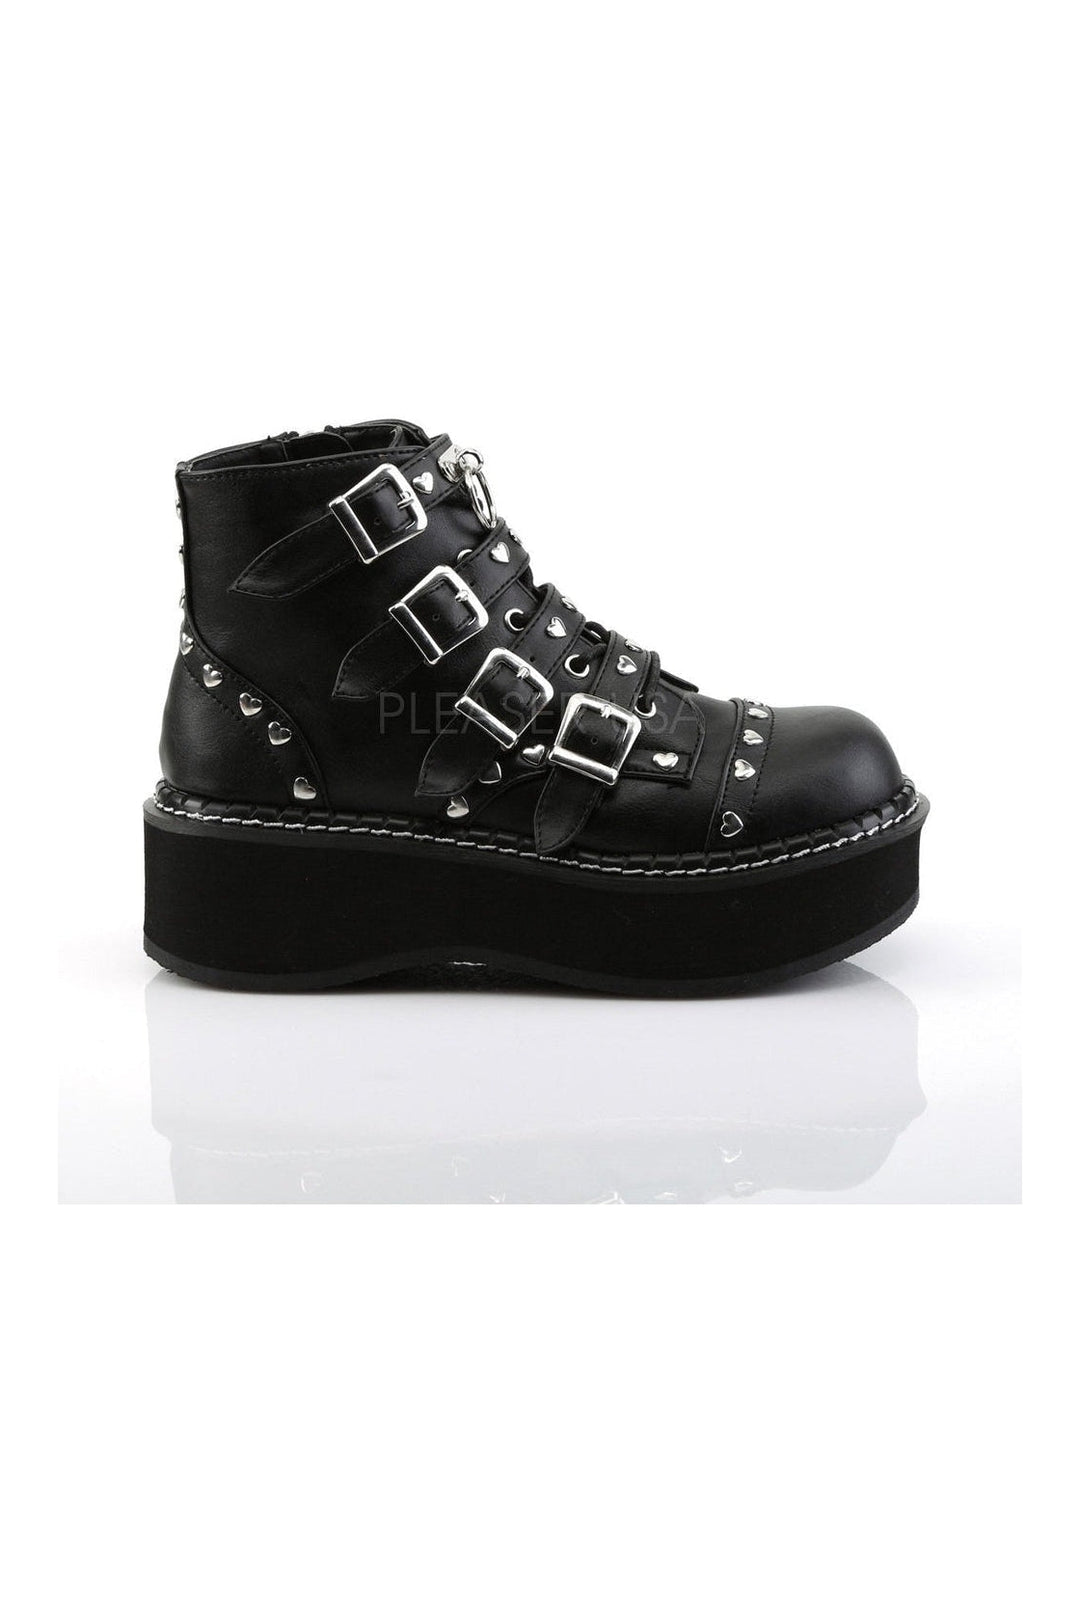 EMILY-315 Demonia Ankle Boot | Black Faux Leather-Demonia-Ankle Boots-SEXYSHOES.COM